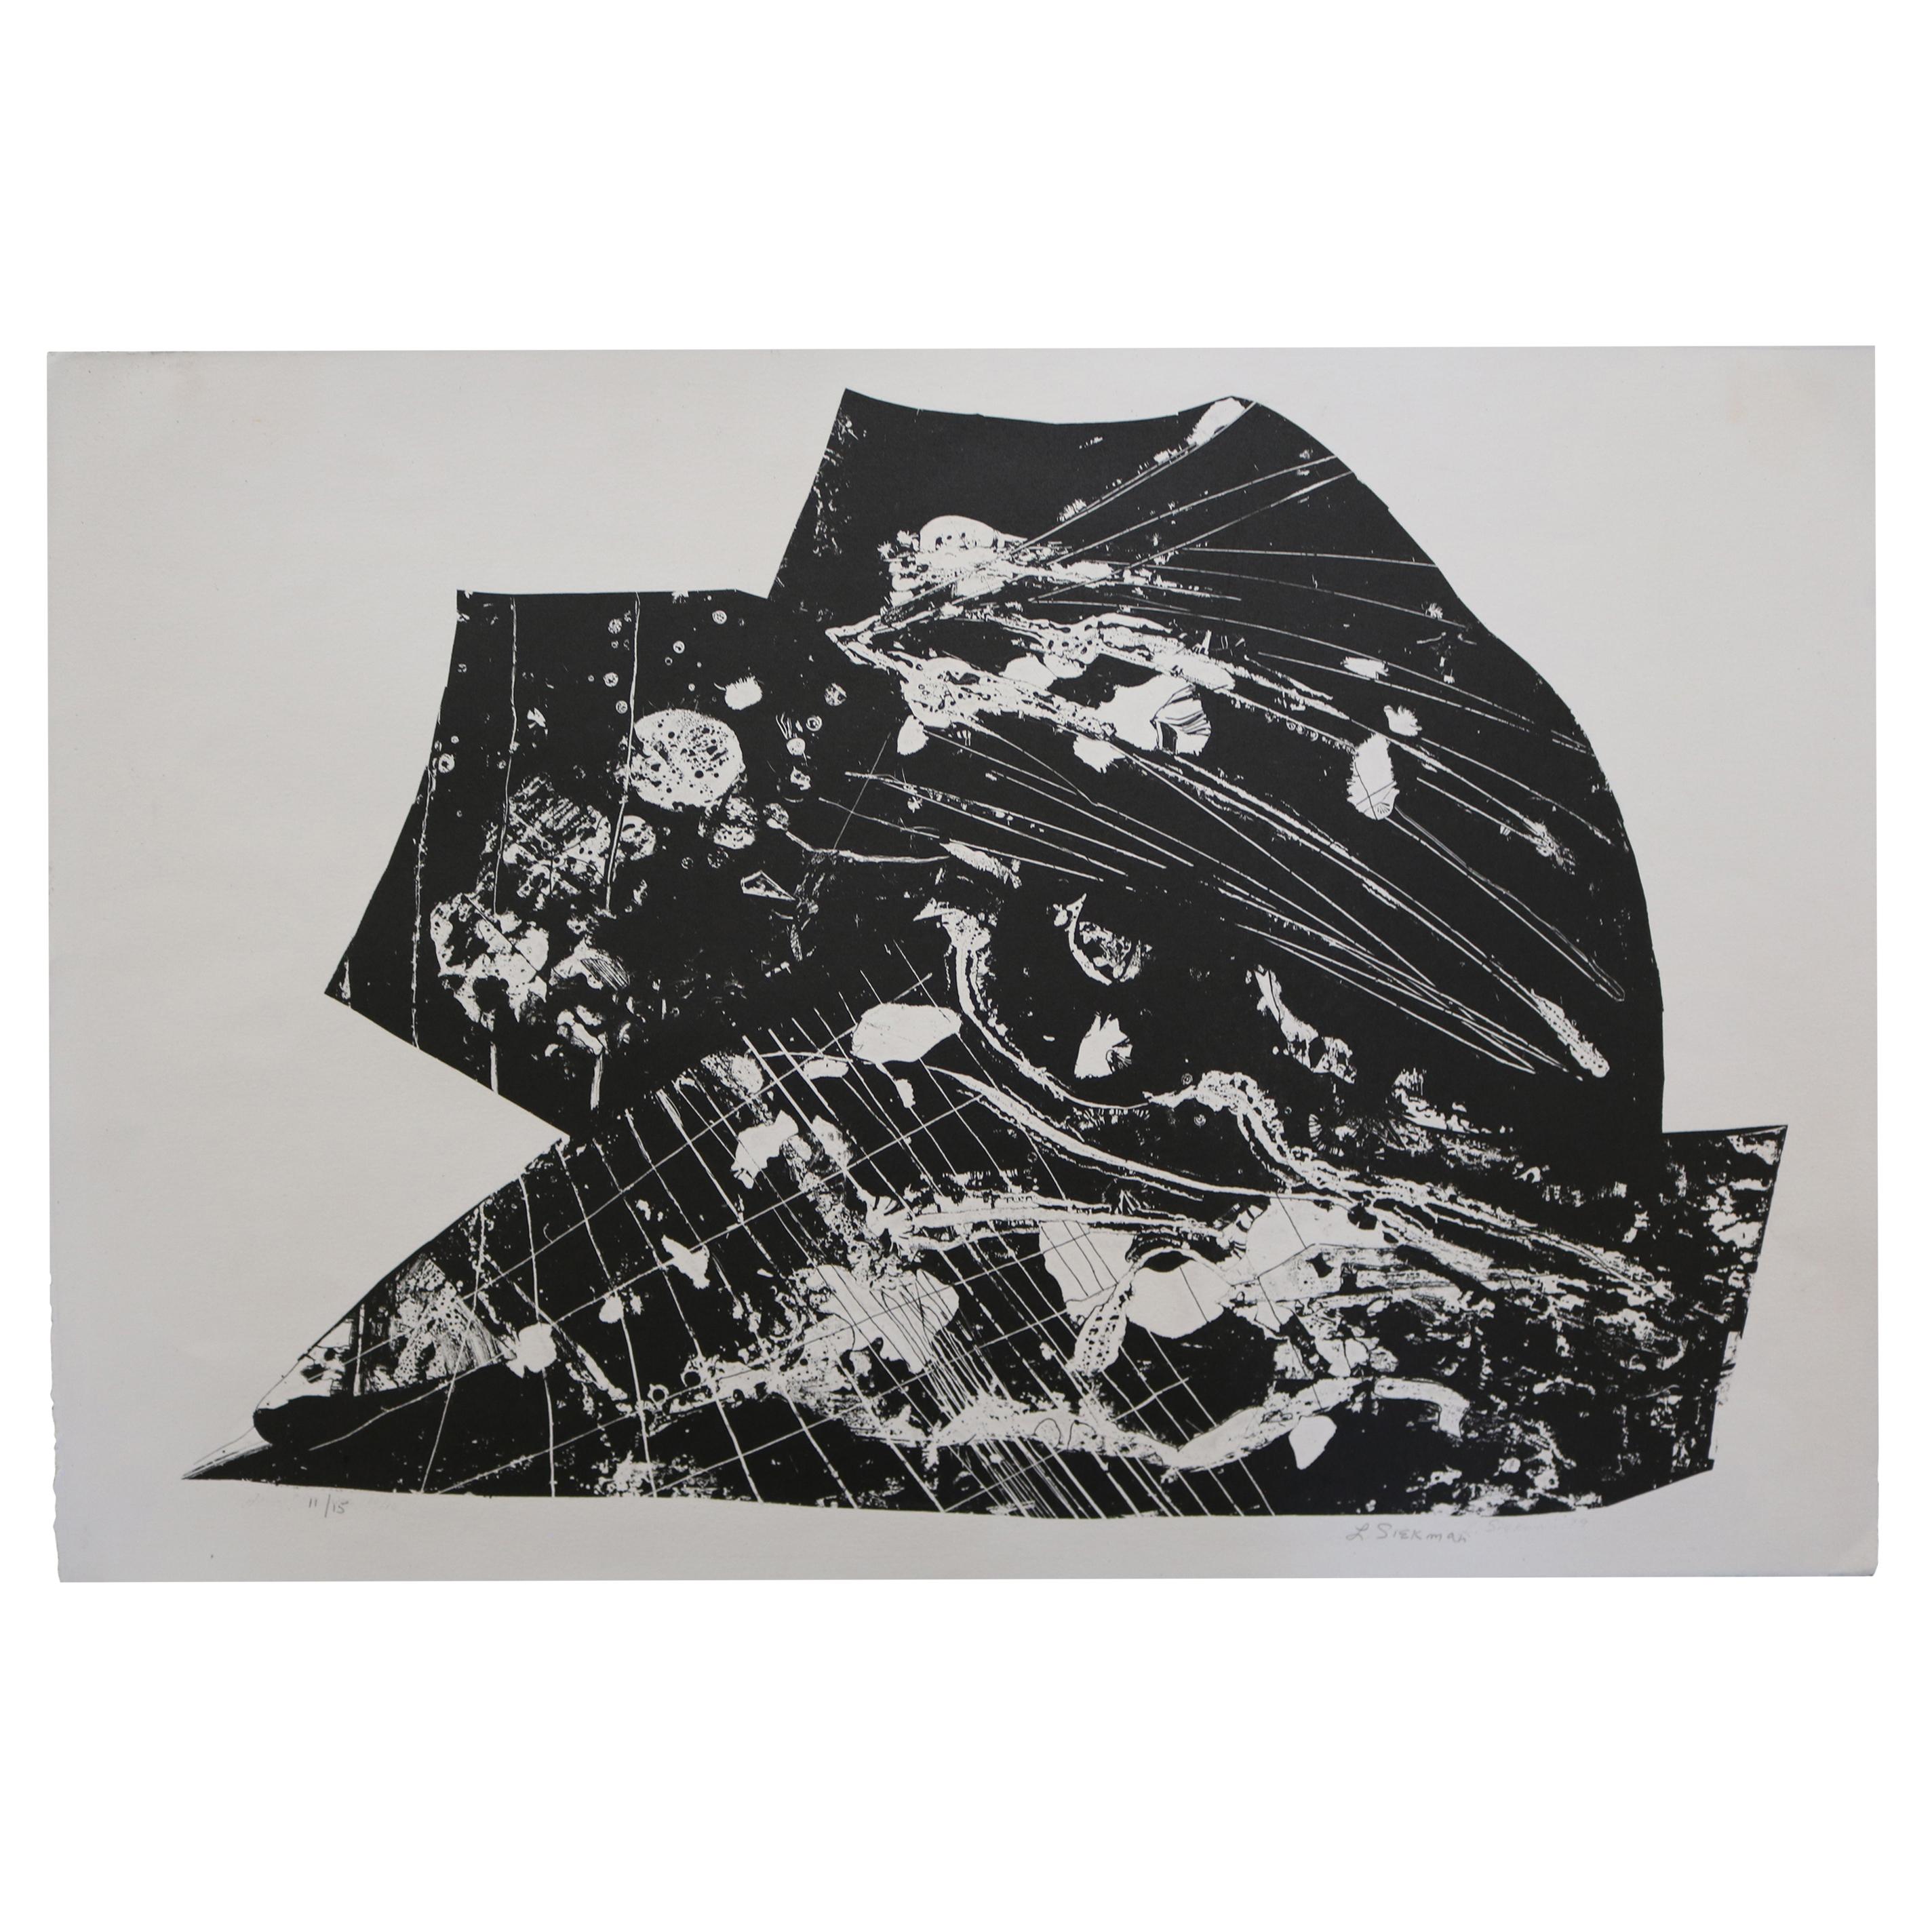 Unframed Lithograph by Lucy Siekman